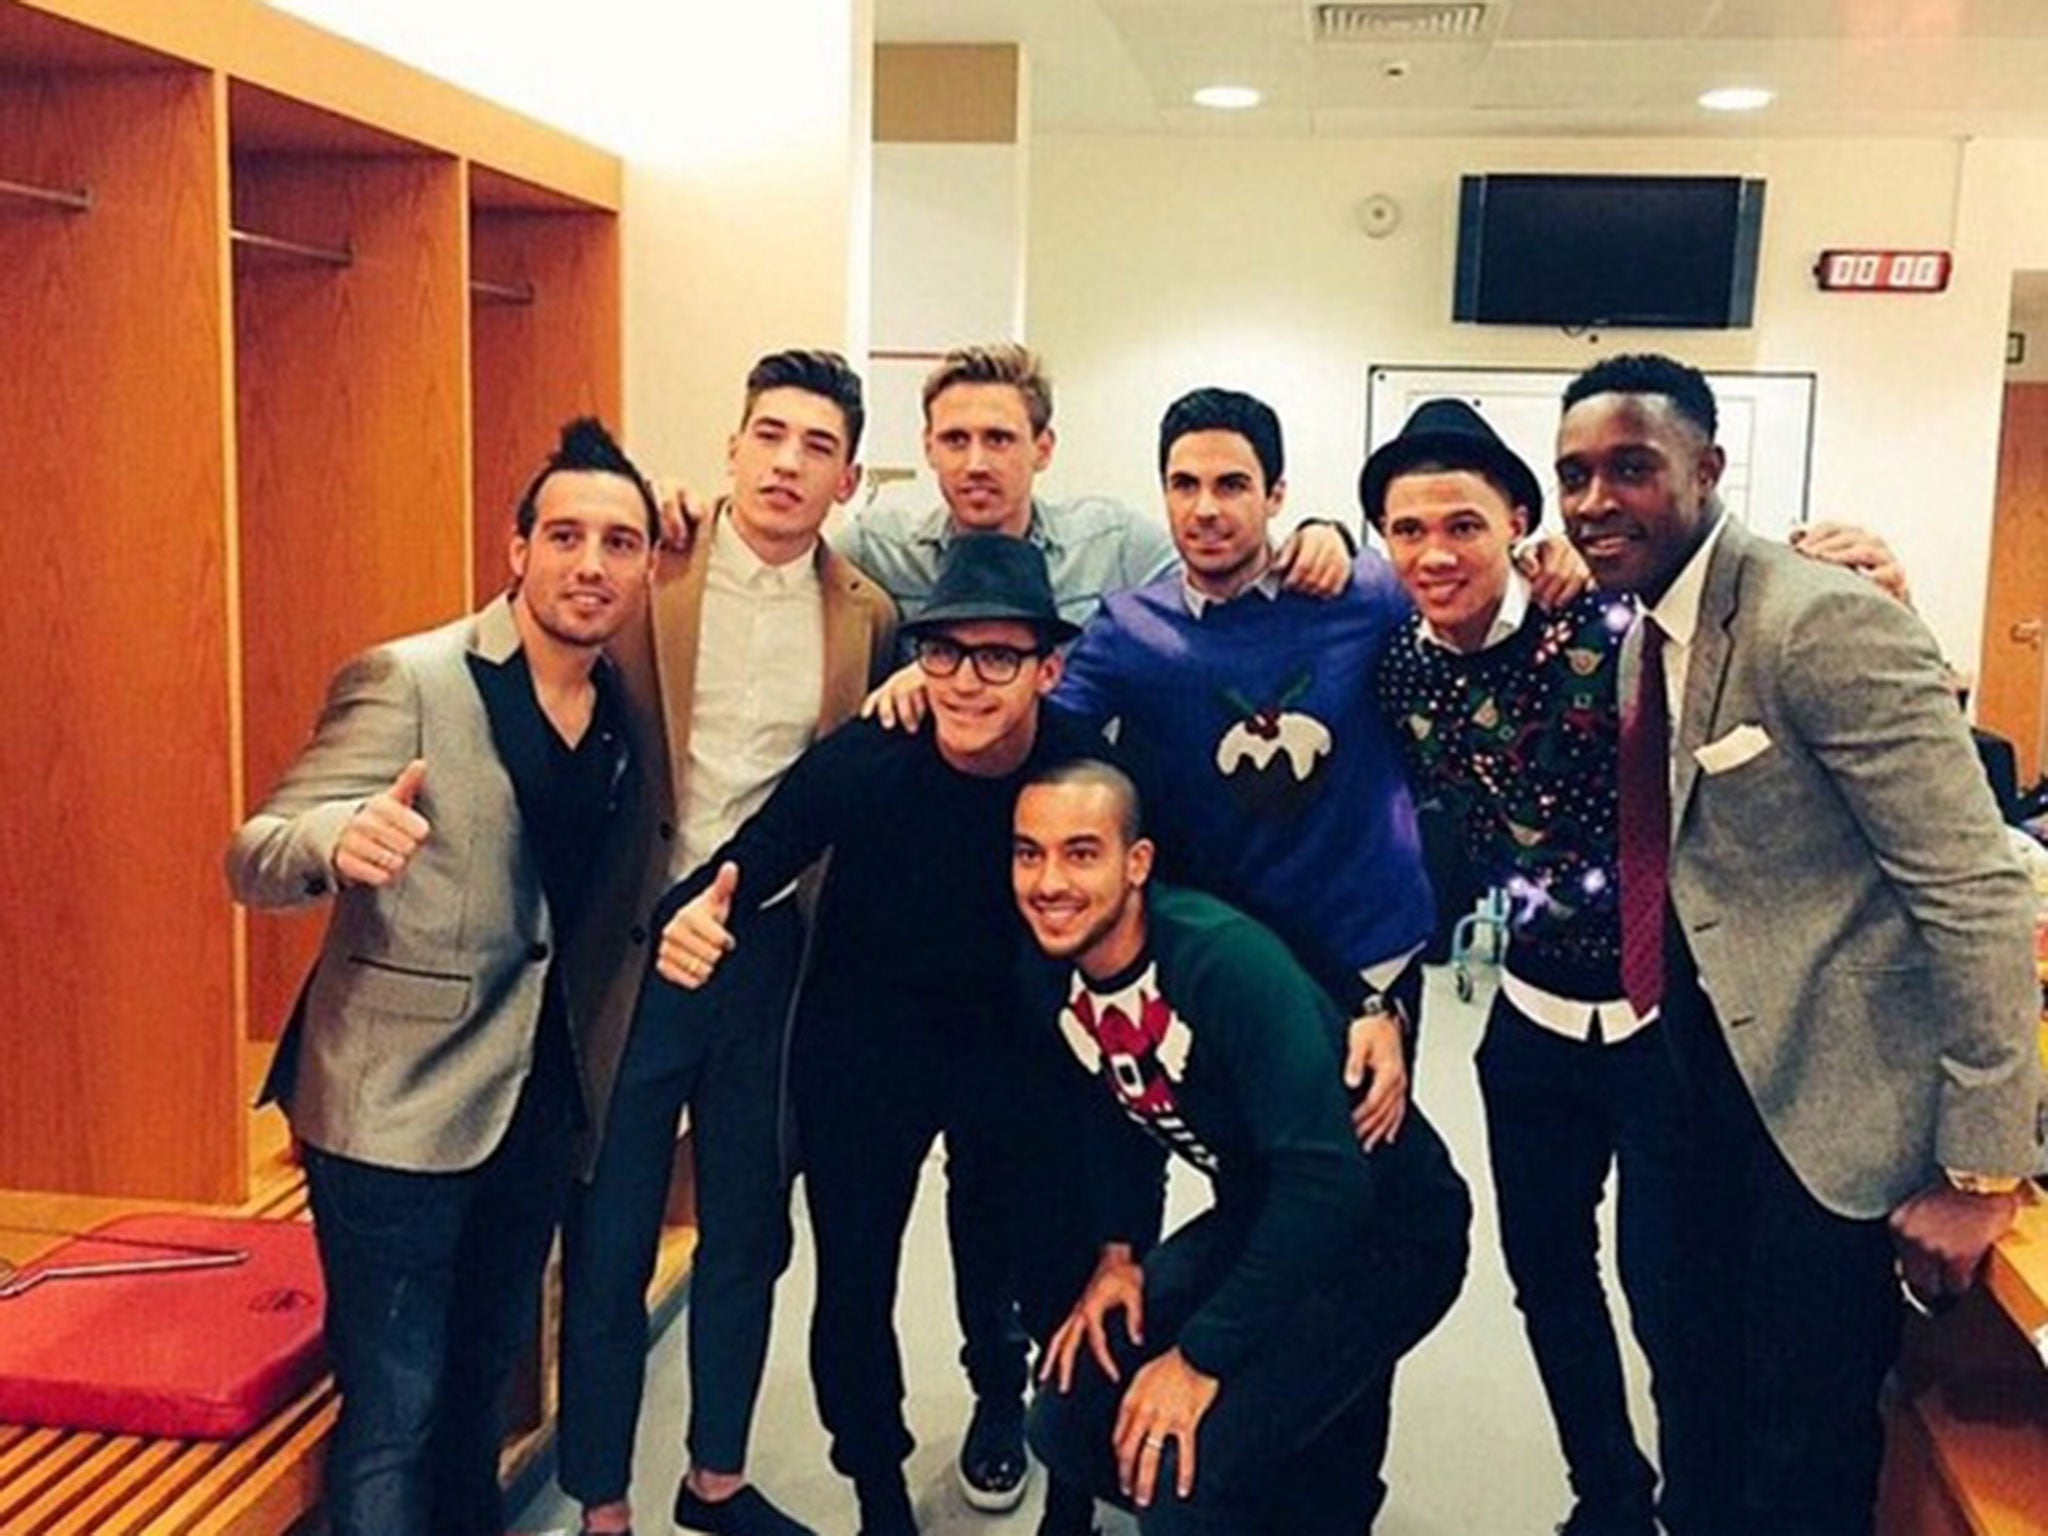 Arsenal's stars were in festive mood ahead of their night off